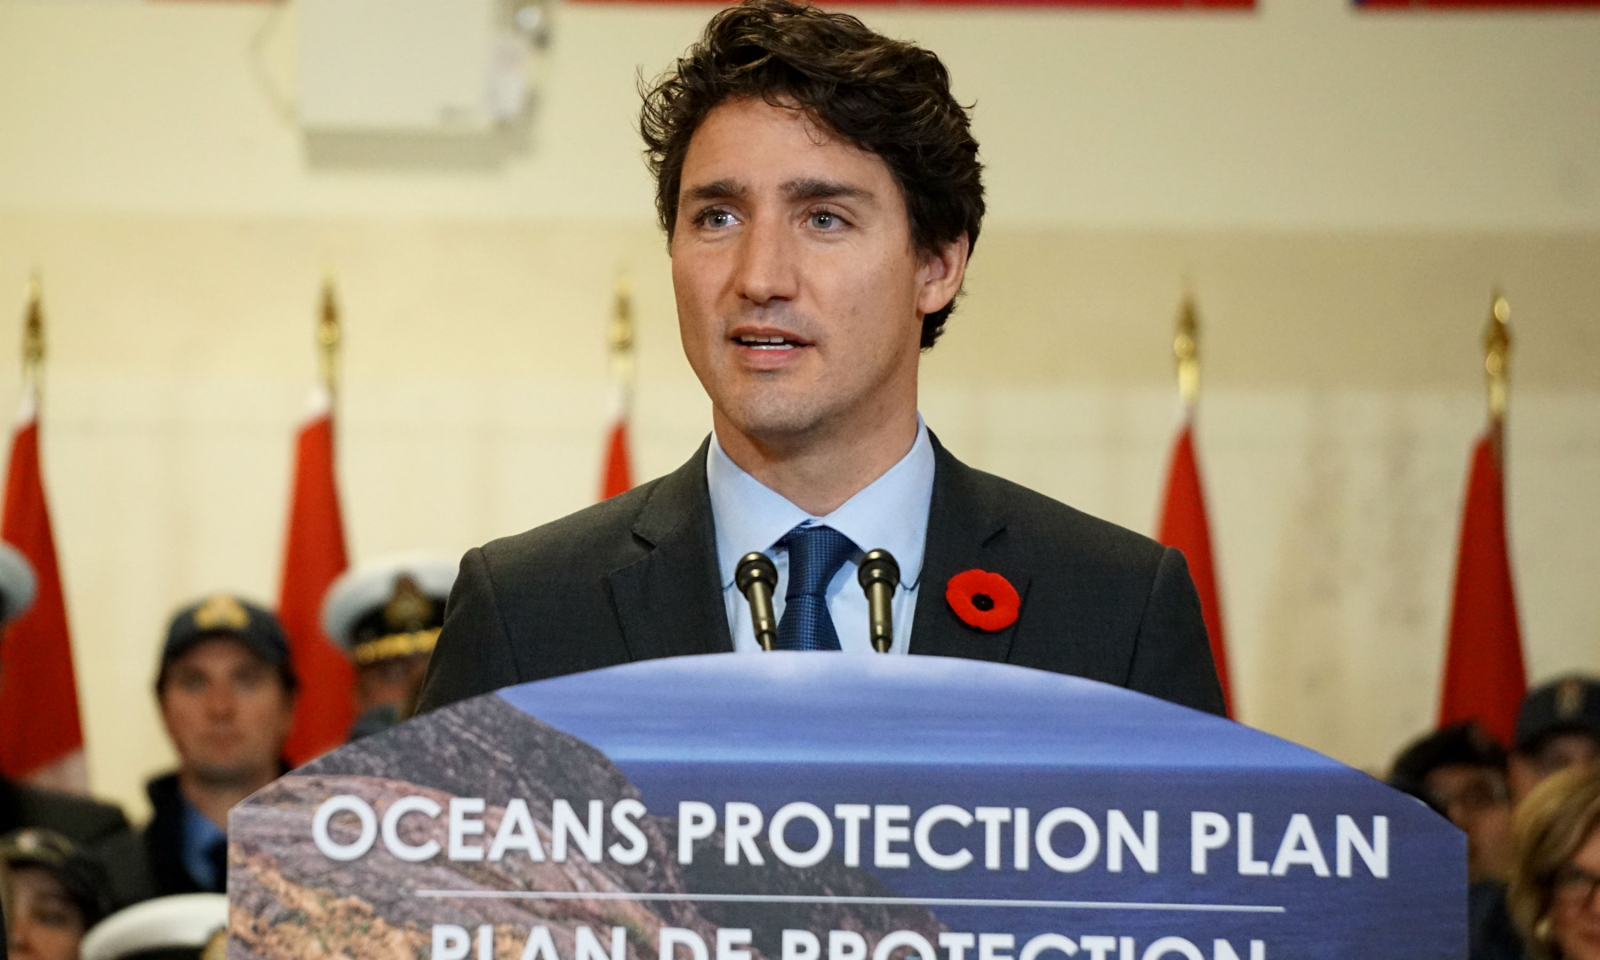 Justin Trudeau, Vancouver, National Oceans Protection Plan